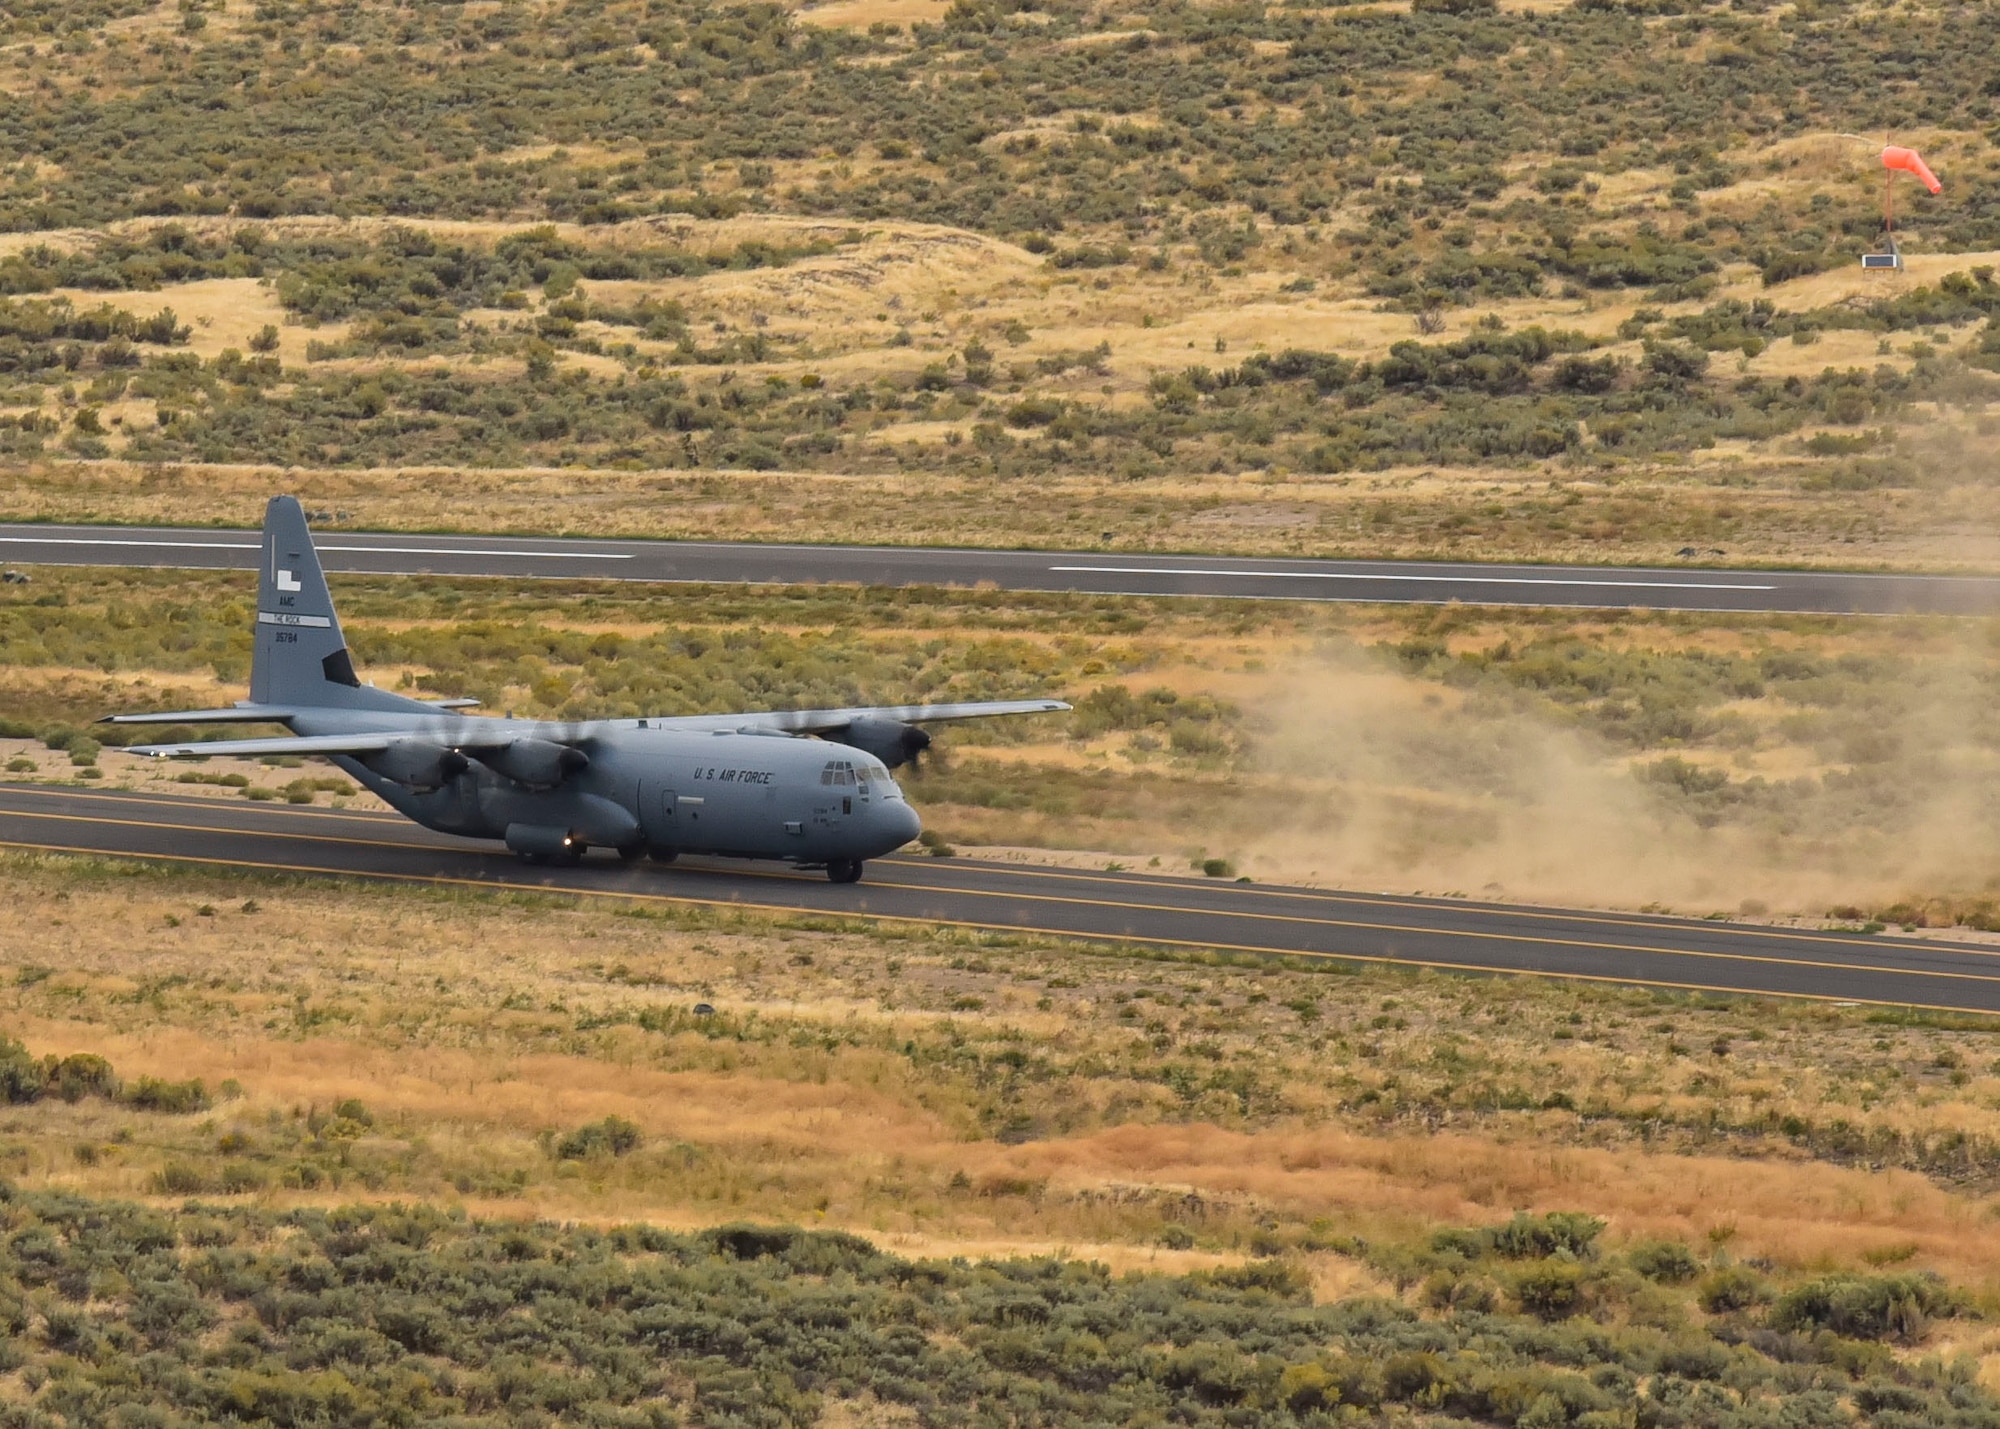 A U.S. Air Force C-130 Hercules from Little Rock Air Force Base, Arkansas, lands on a runway to deliver Humvees, cargo, and U.S. Air Force Airmen for a Joint Forcible Entry operation during Air Mobility Command’s Mobility Guardian exercise.